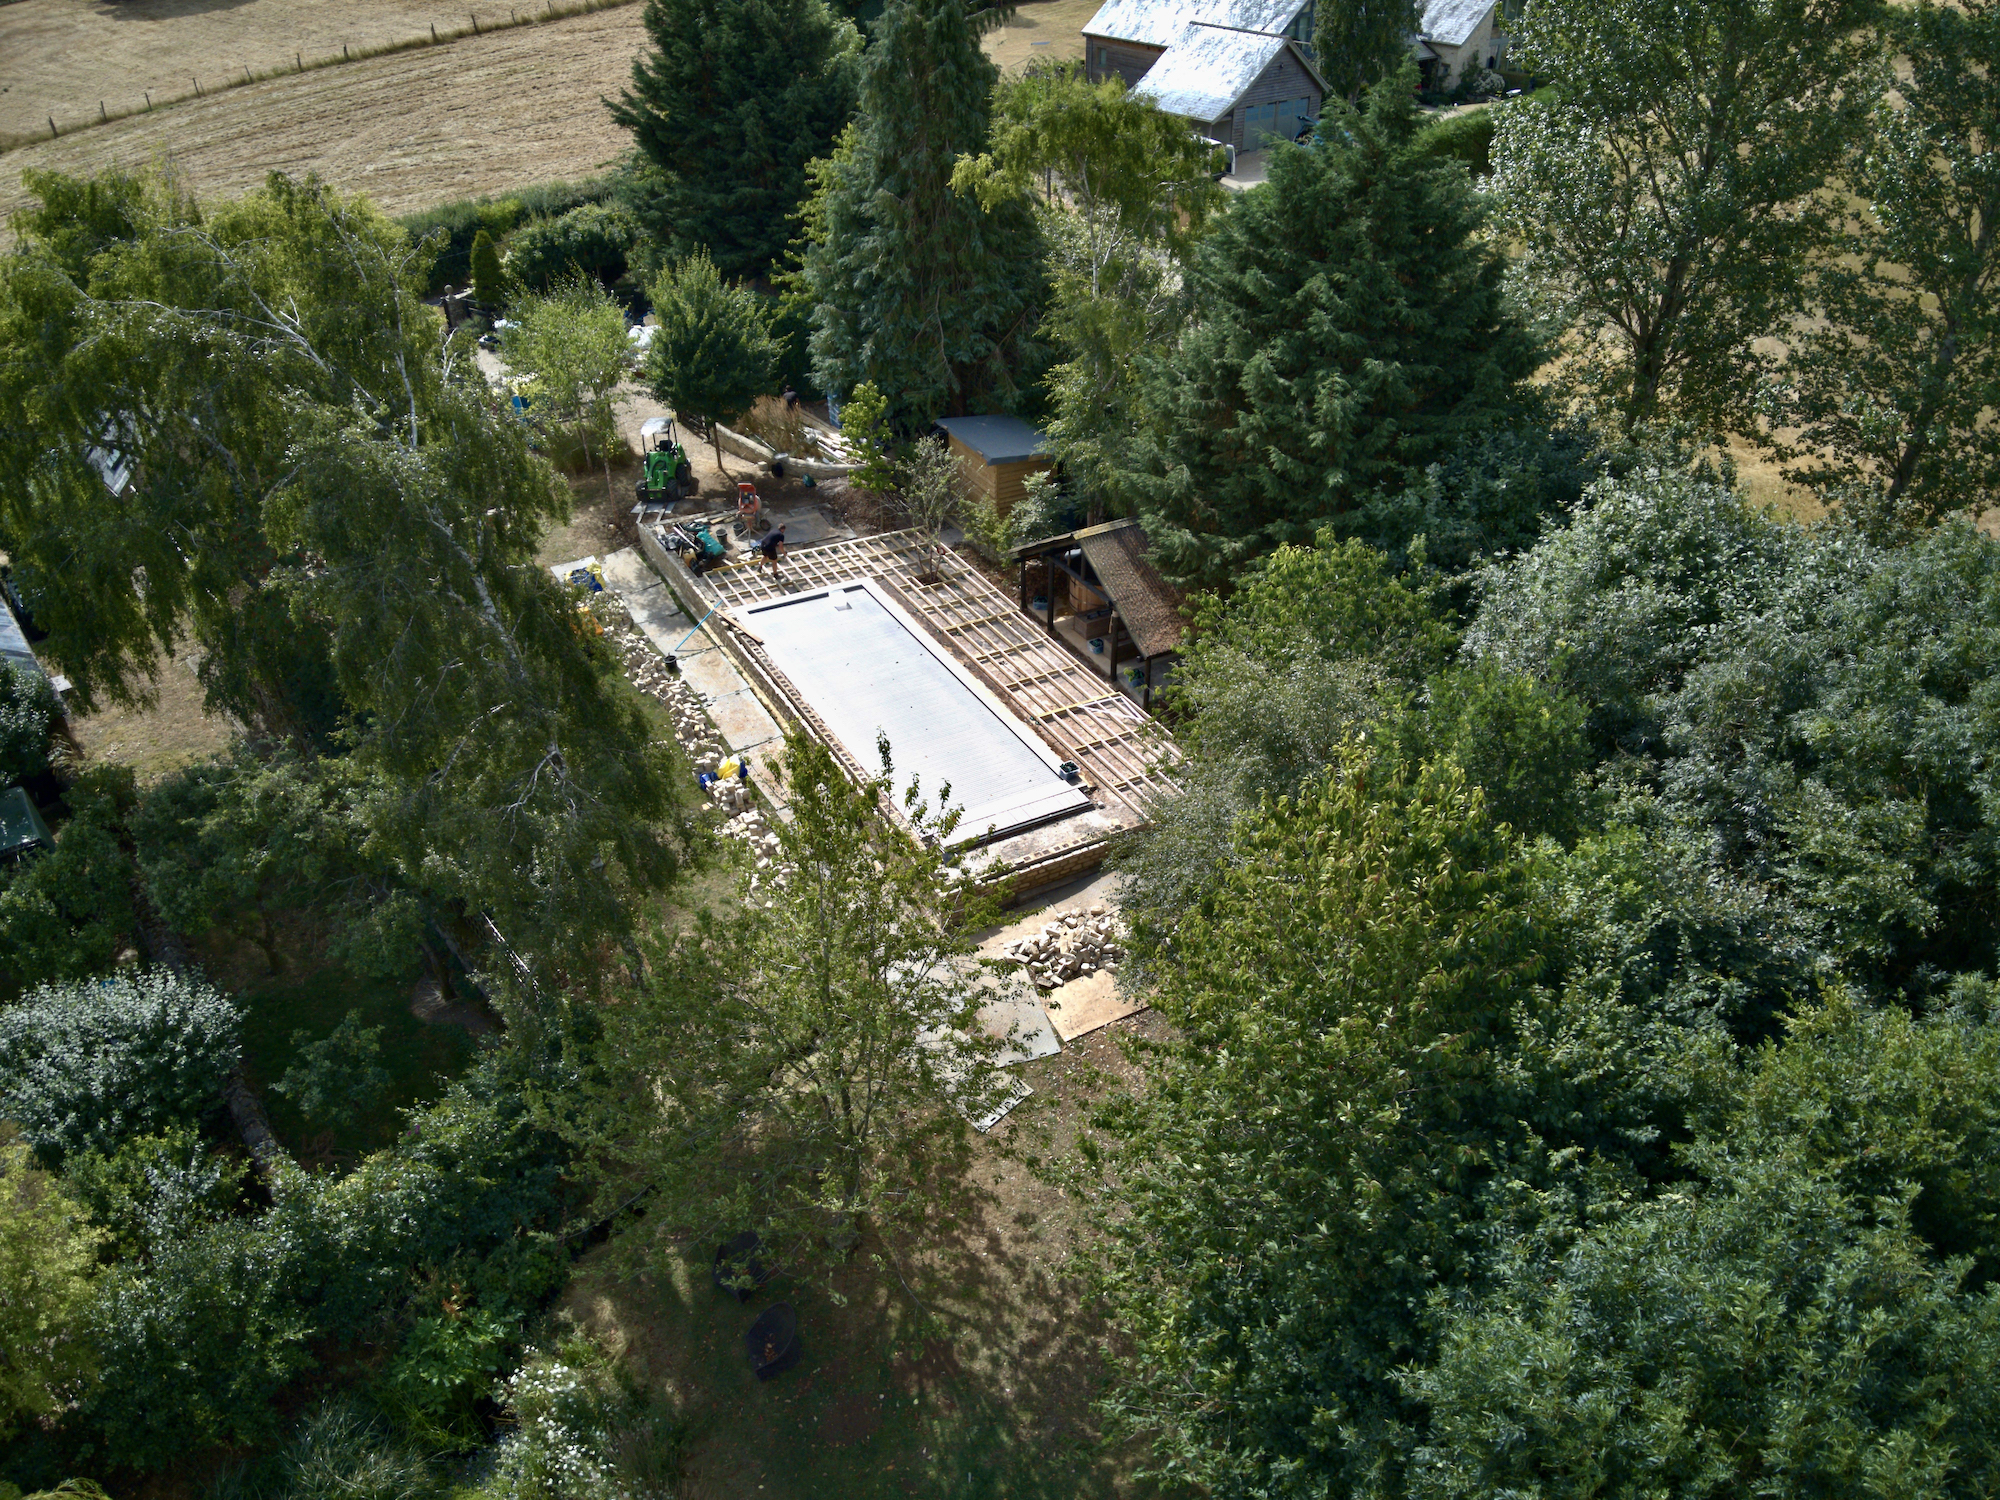 swimming pool seen from above the trees